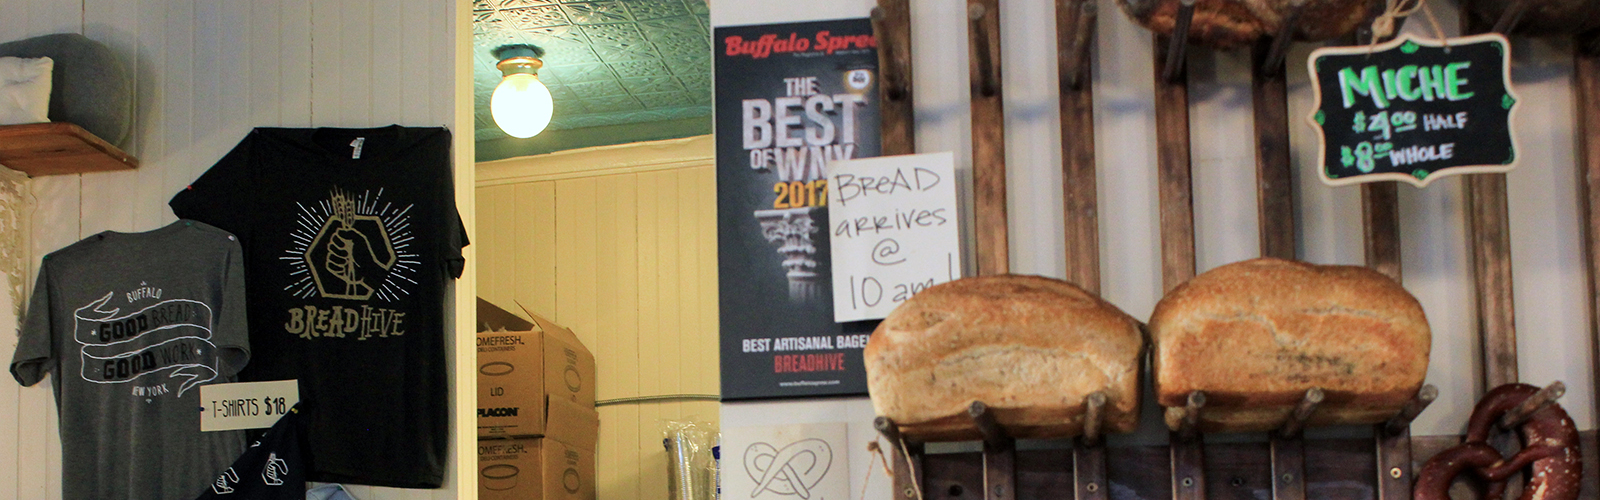 The BreadHive Bakery and Café is a staple of Buffalo's West Side.